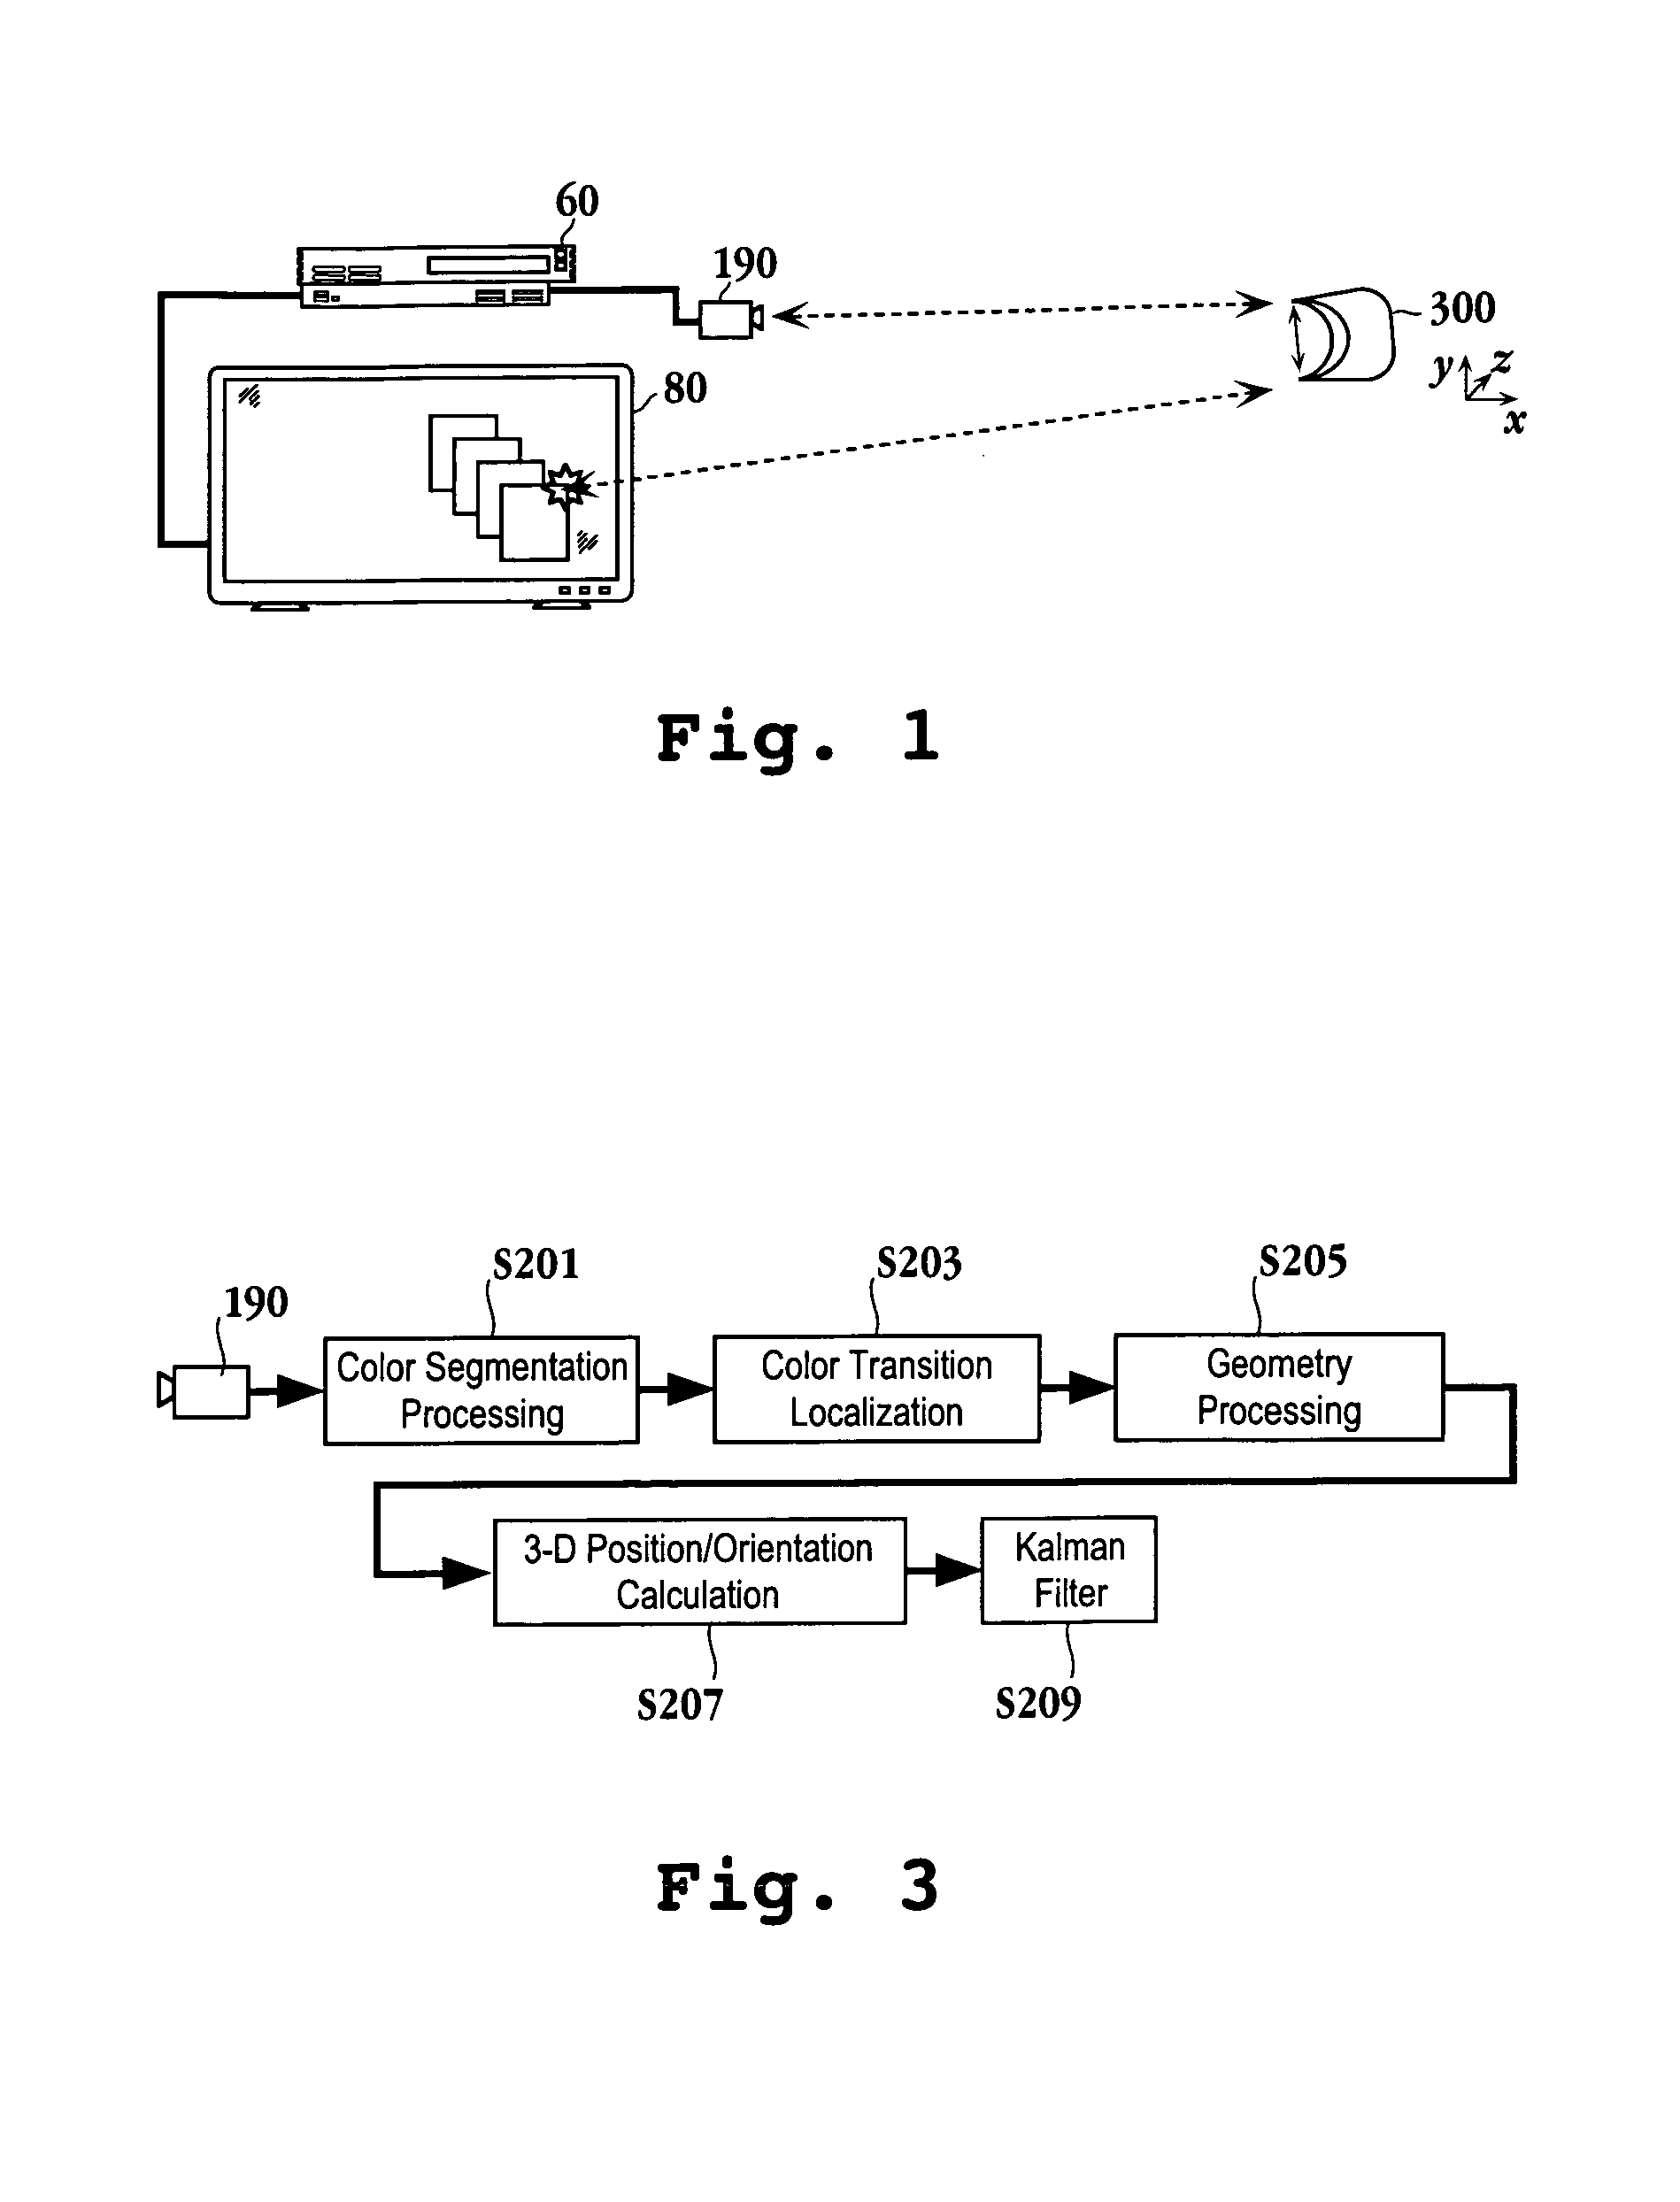 Man-machine interface using a deformable device